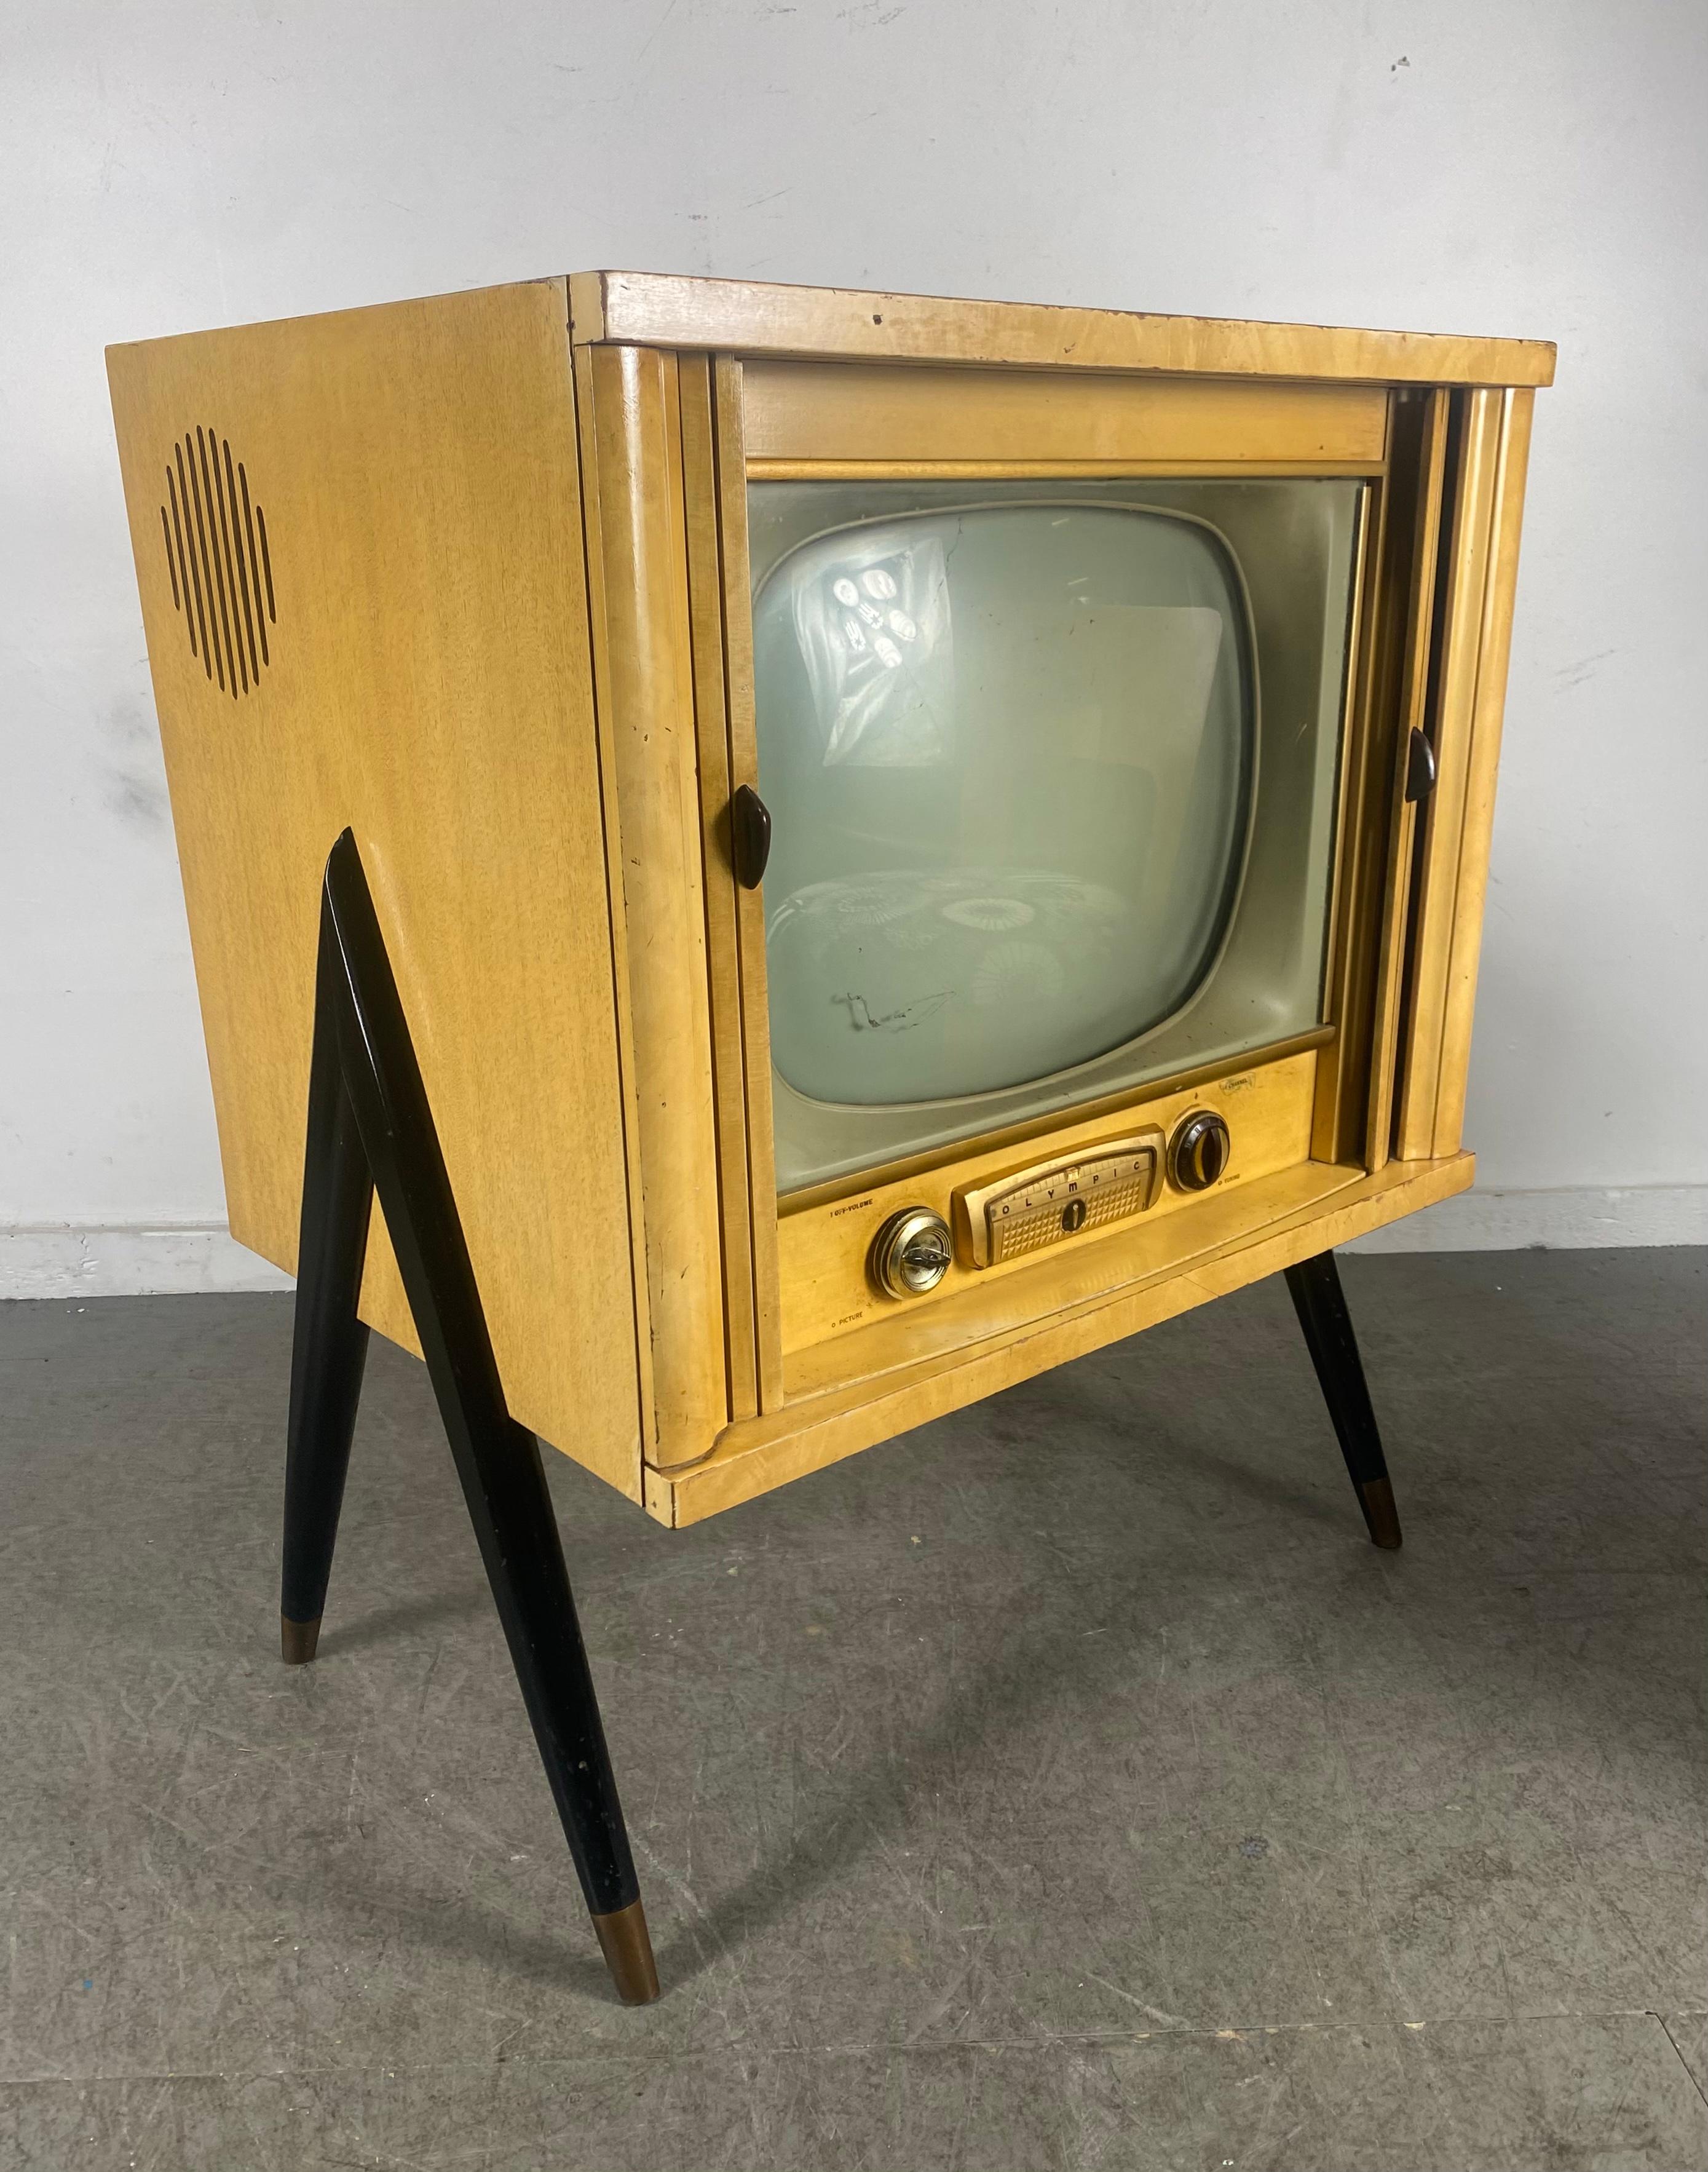 Mid-Century Modern Modernist Atomic 1950s Television by Olympic, Tambour Doors 